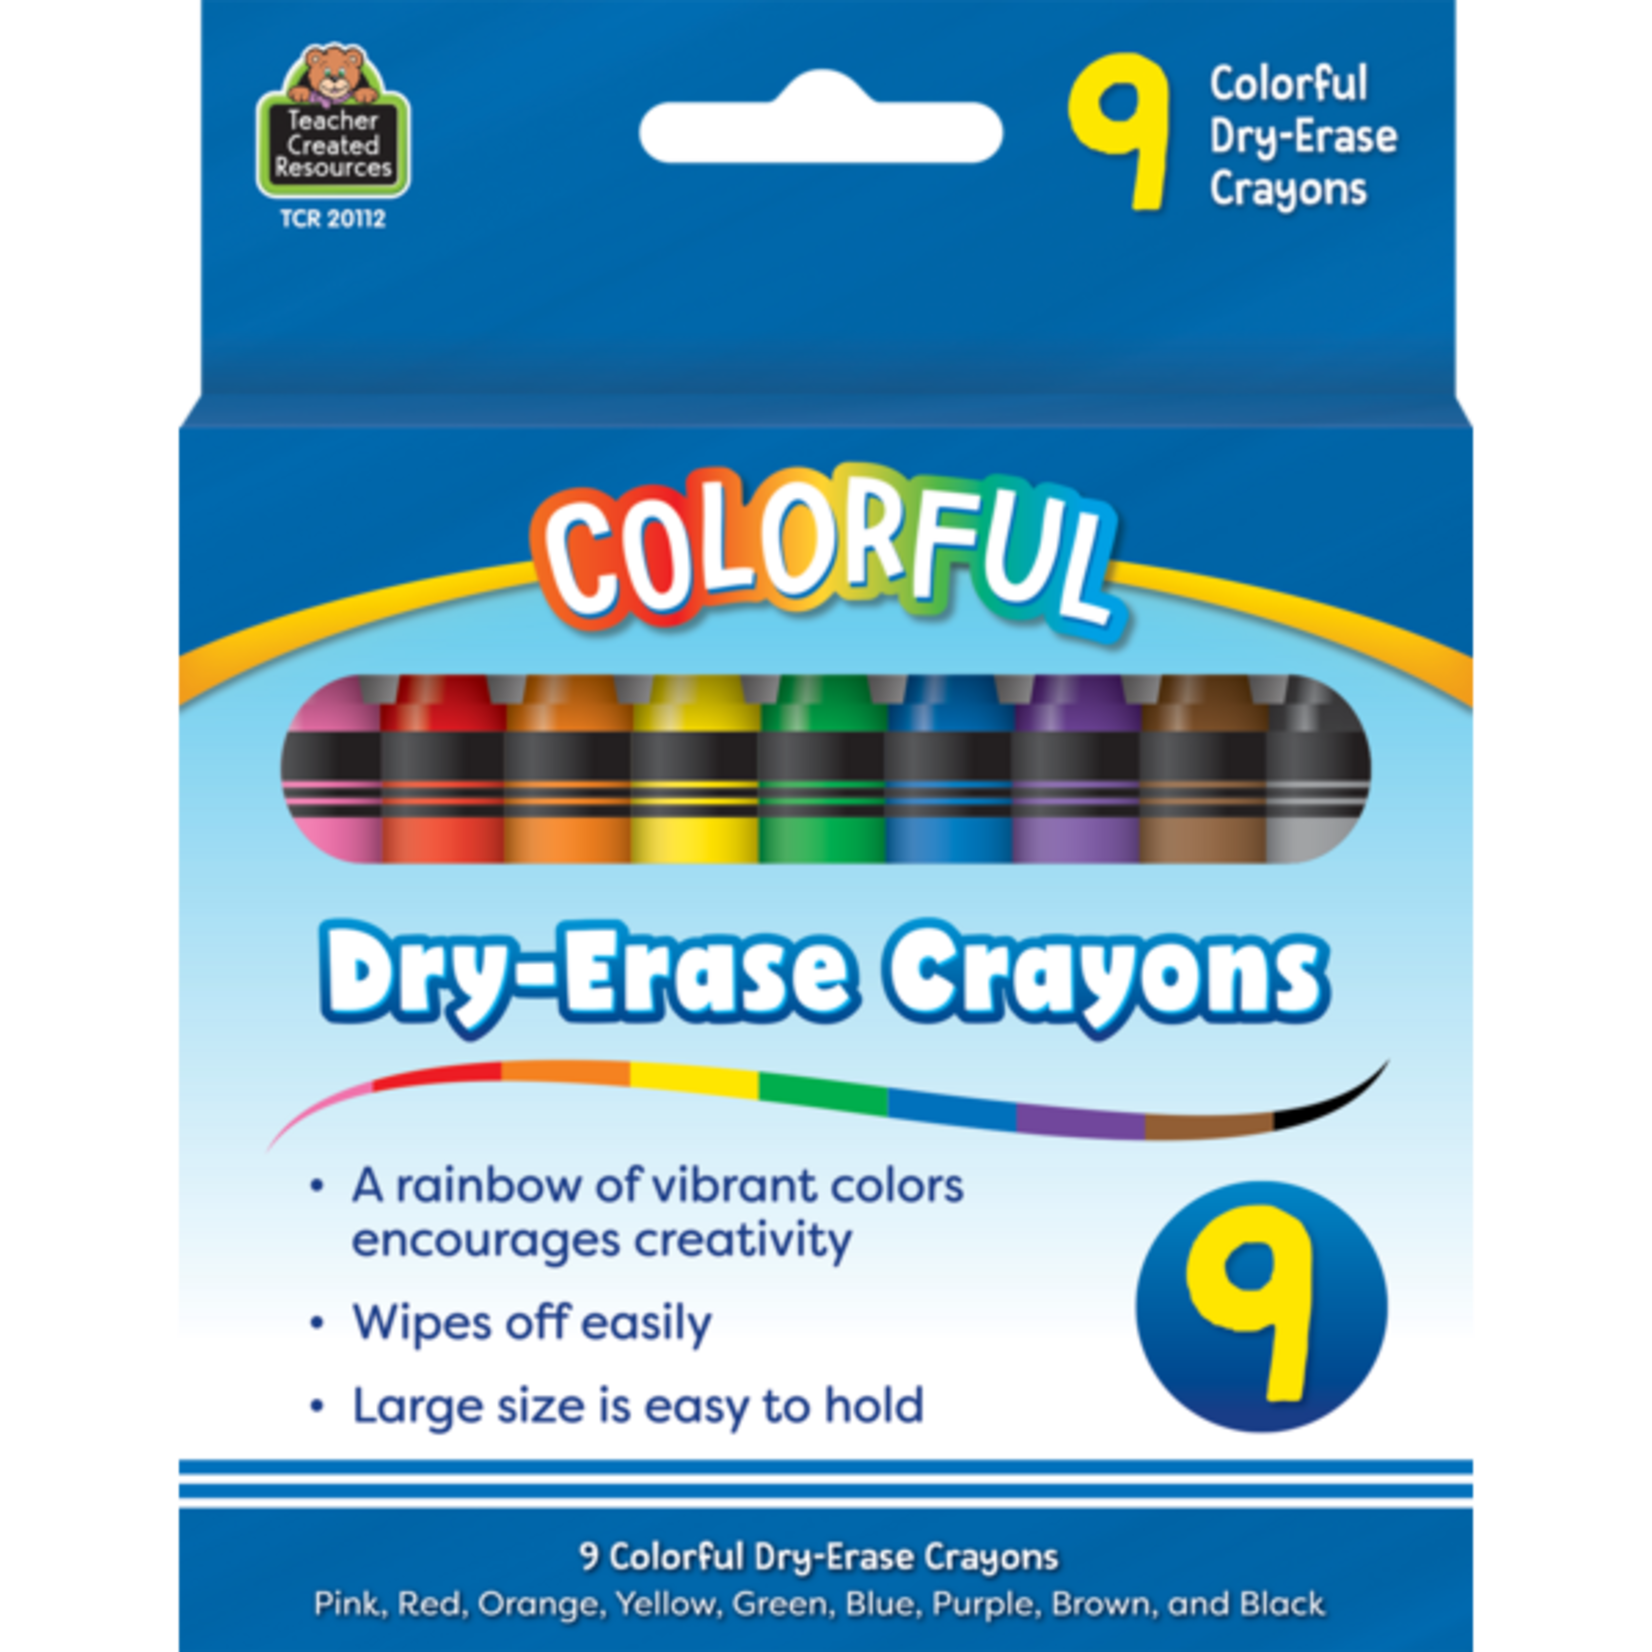 TEACHER CREATED RESOURCES Colorful Dry-Erase Crayons